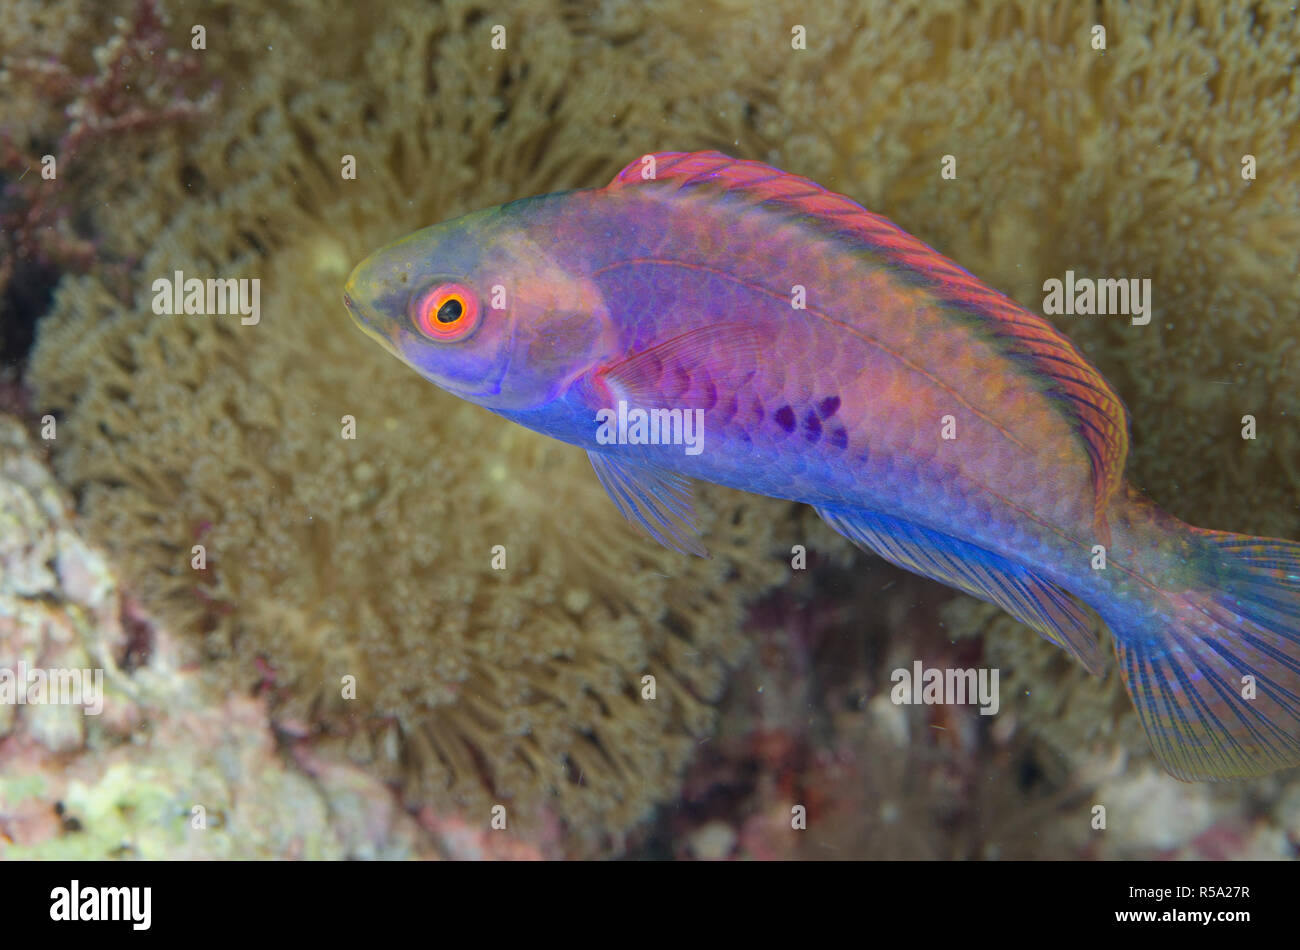 Blue-scaled Fairy-Wrasse, Cirrhilabrus cyanopleura, Coral Cliff dive site, off Alor, Indonesia, Indian Ocean Stock Photo